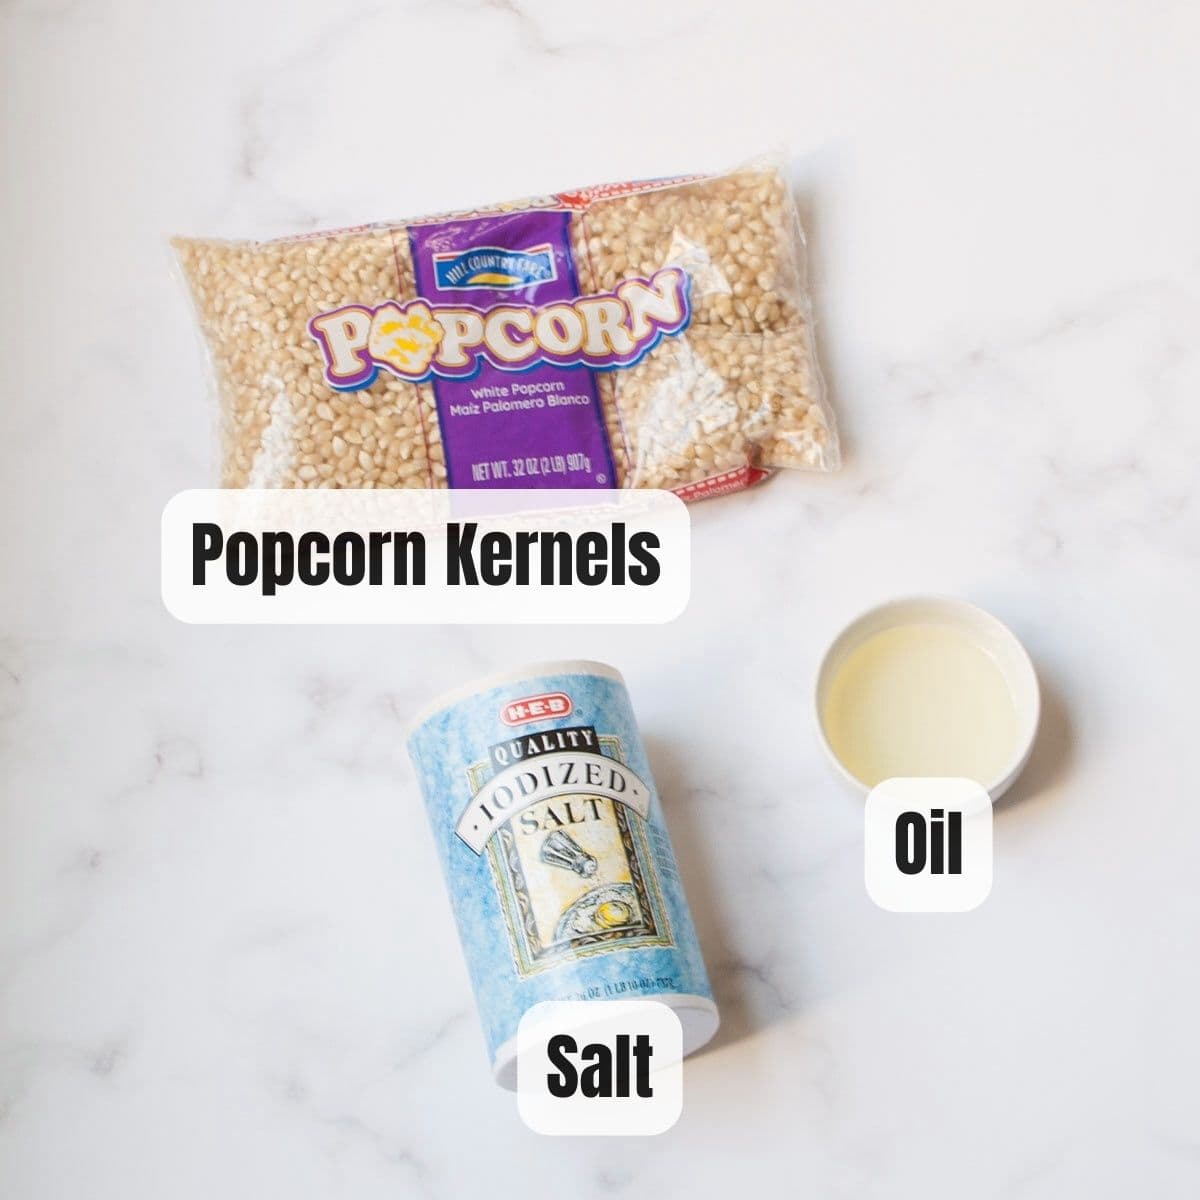 The ingredients needed to make cast iron skillet popcorn.